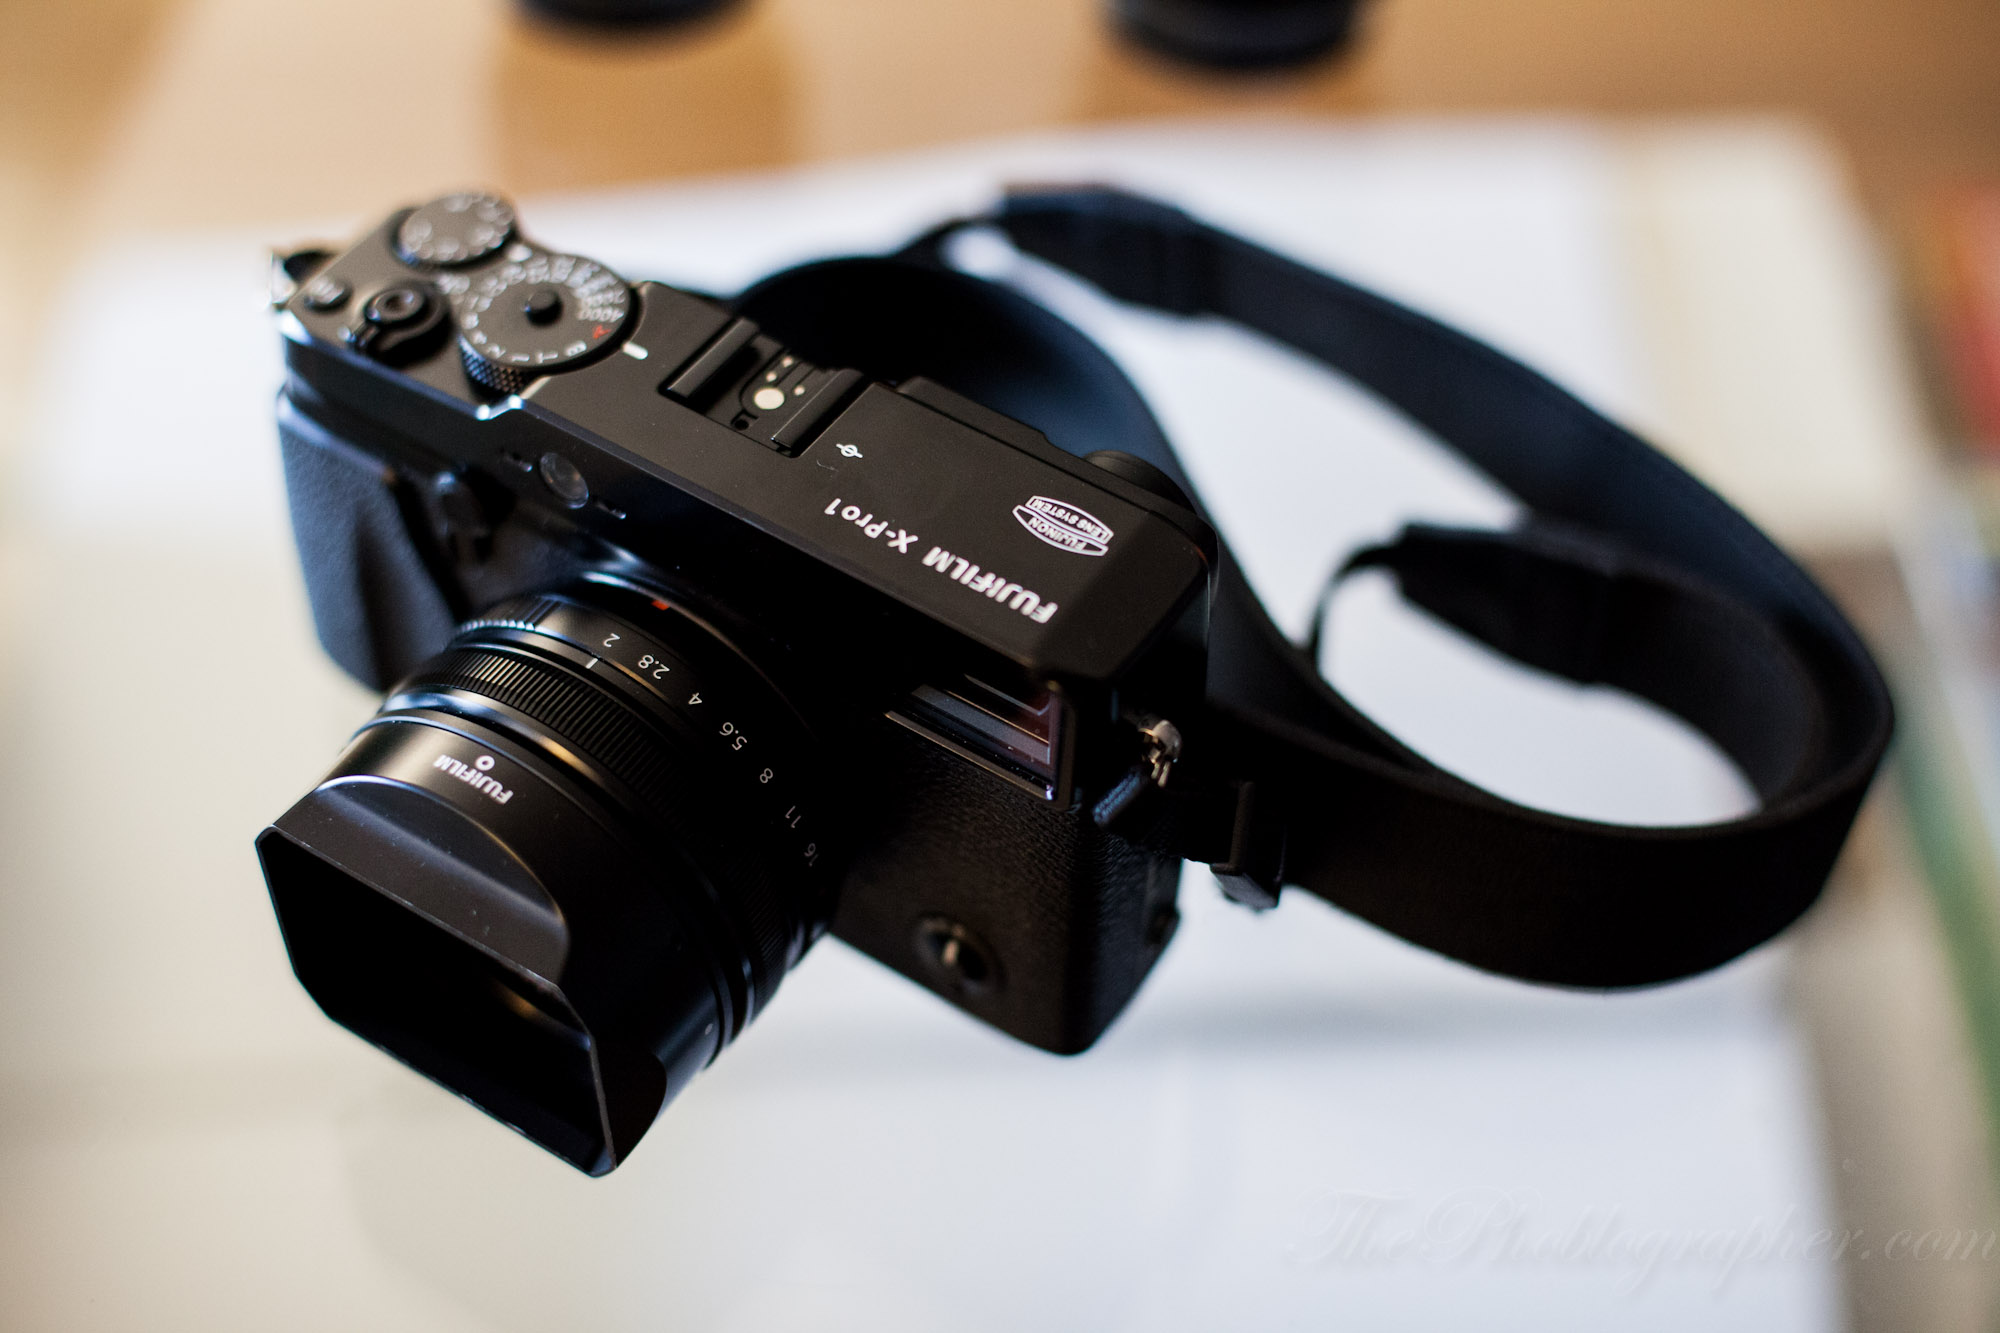 Hands On Review: Fuji X Pro 1 Camera System (With Sample Images)